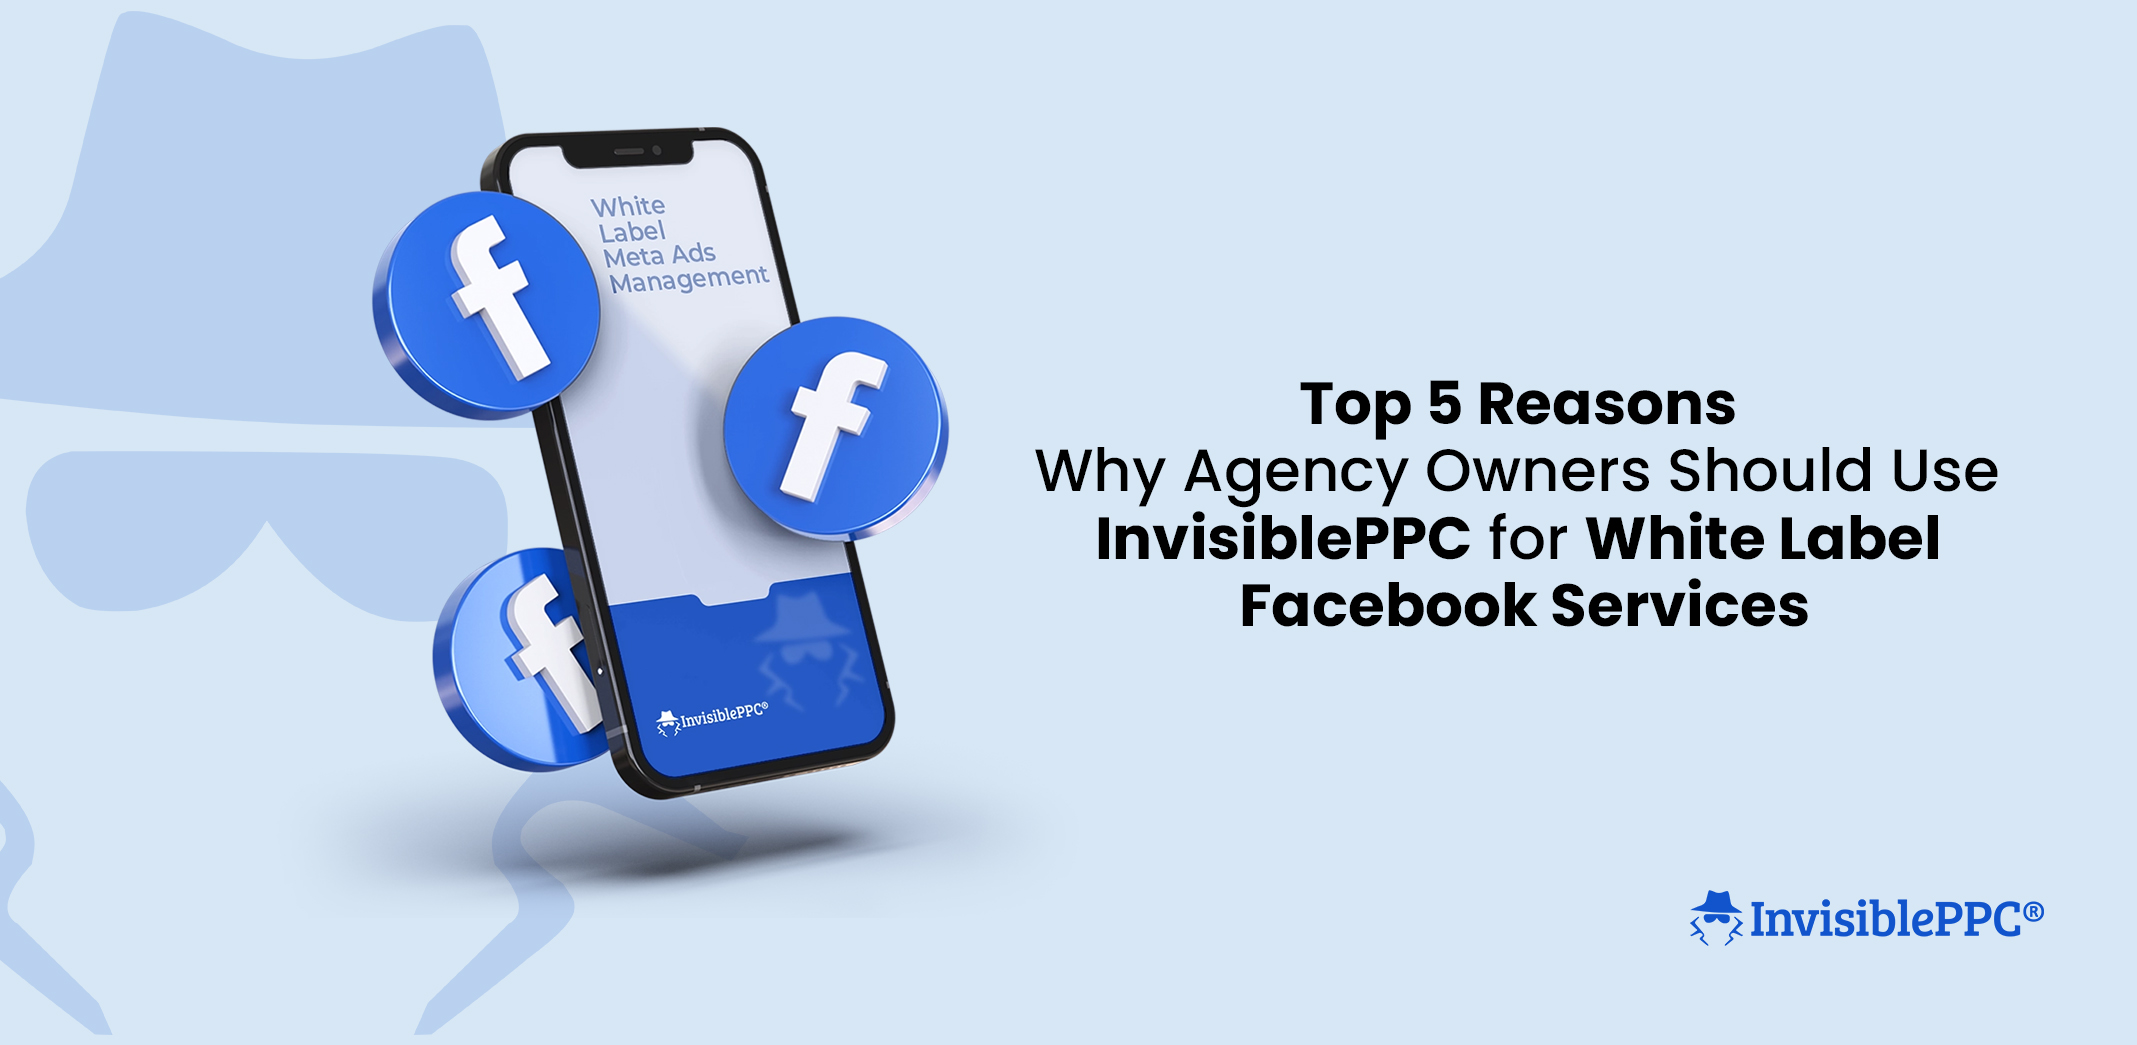 Top 5 Reasons Why Agency Owners Should Use InvisiblePPC for White Label Facebook Services